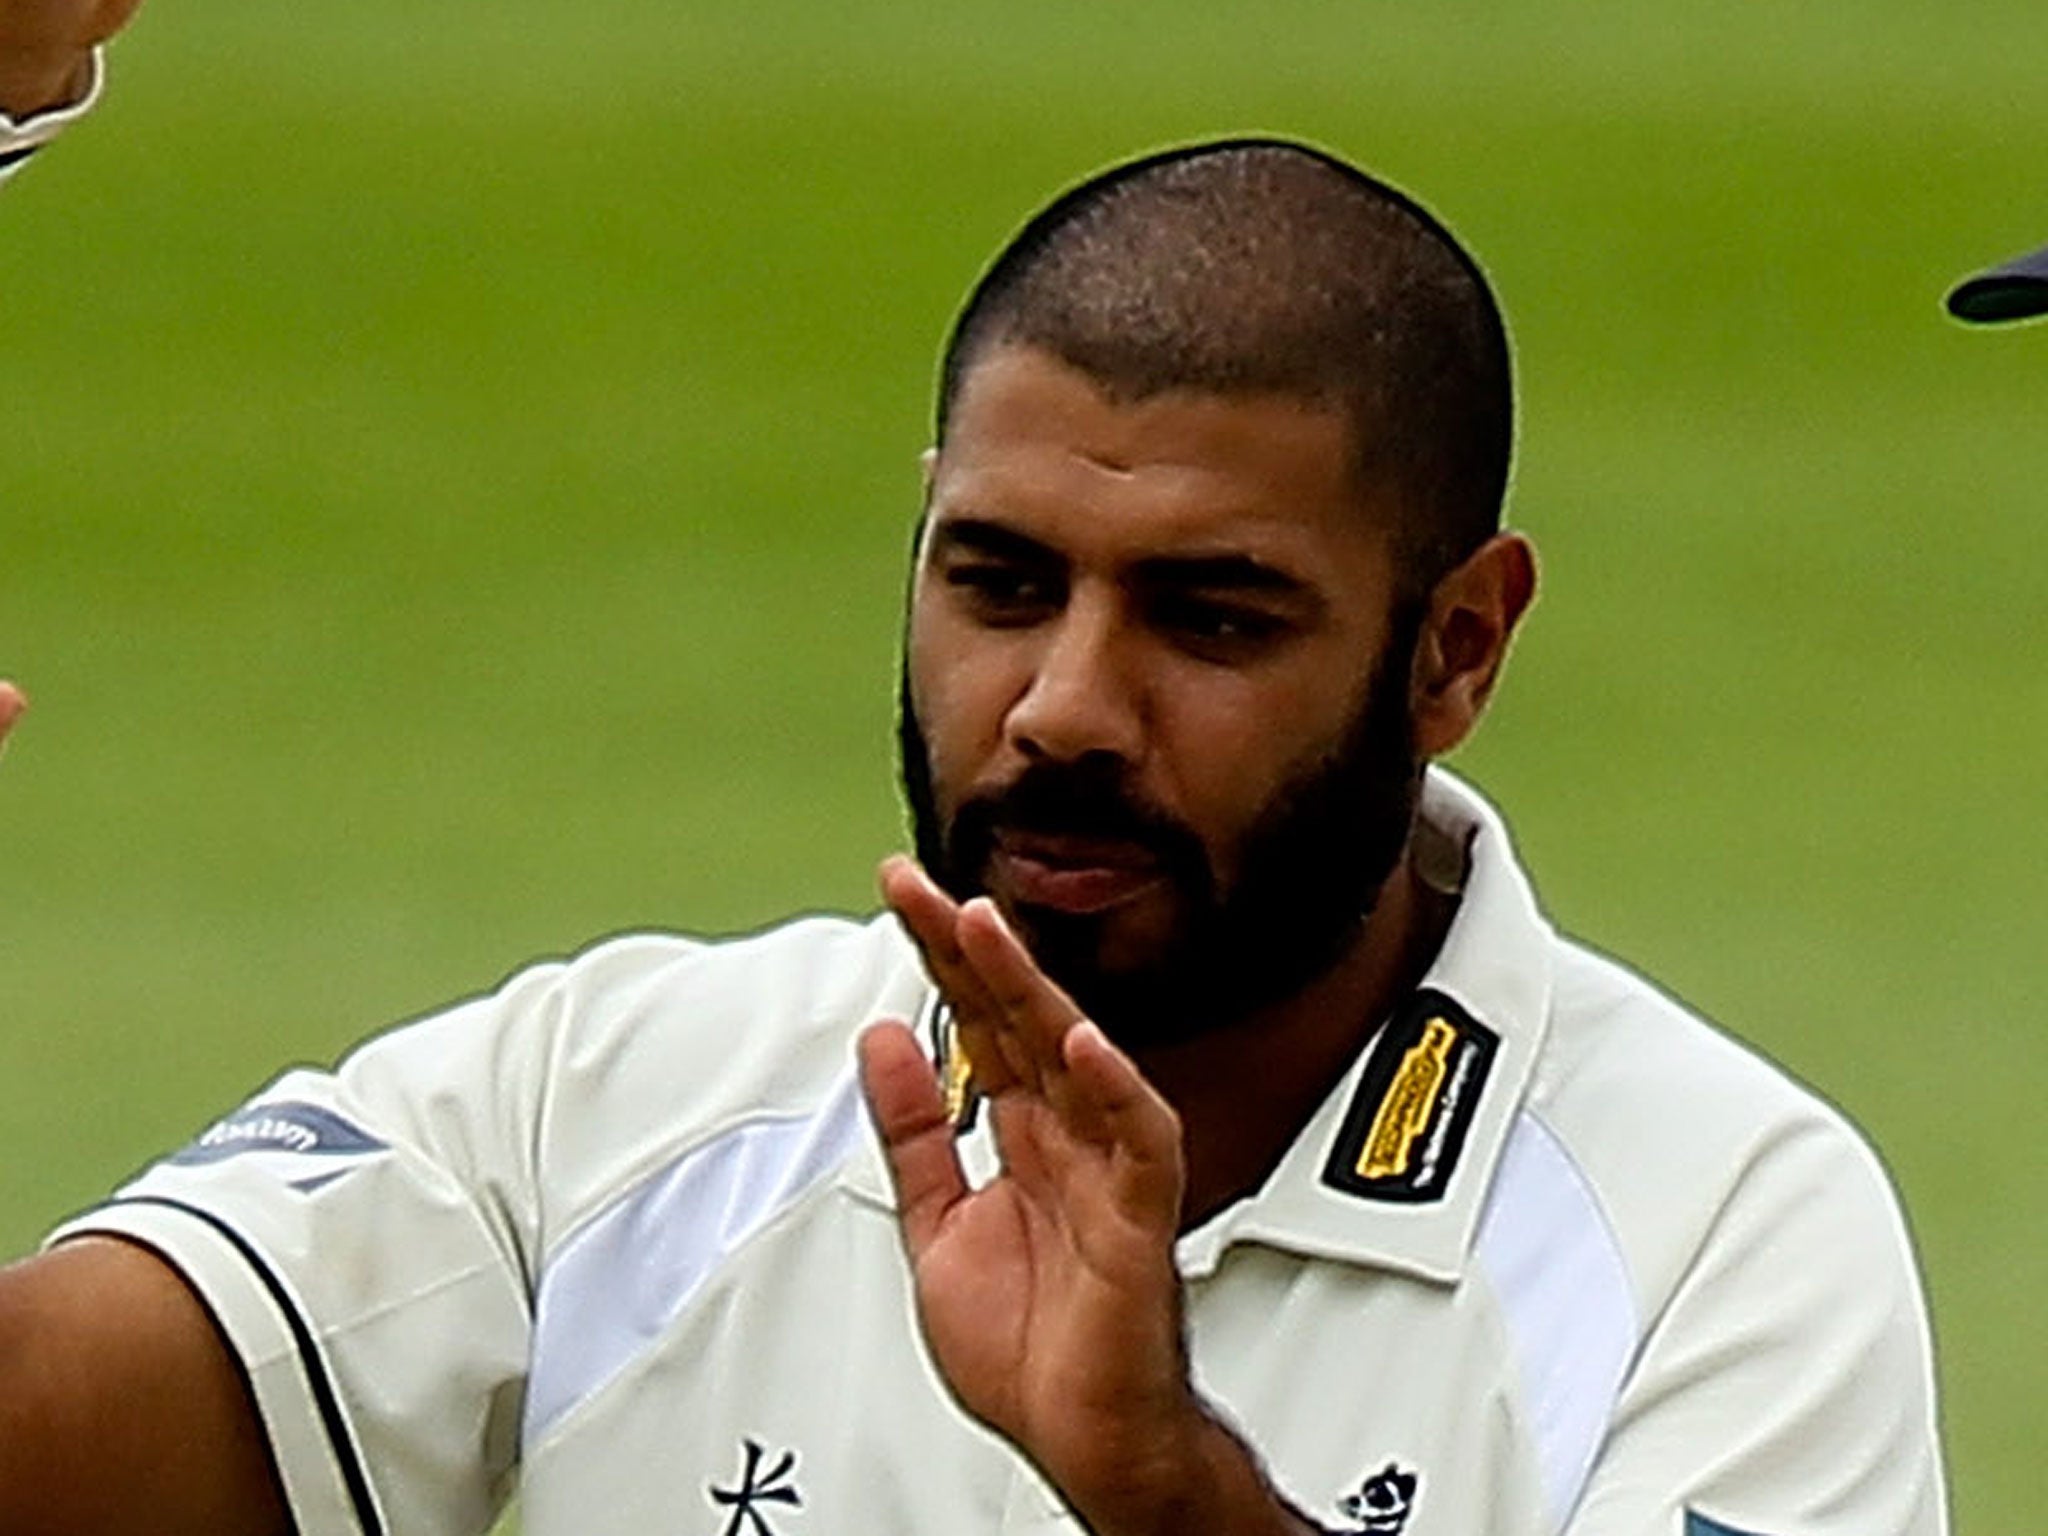 Jeetan Patel struck 63 off only 67 balls after Warwickshire had been reduced to 90 for 6